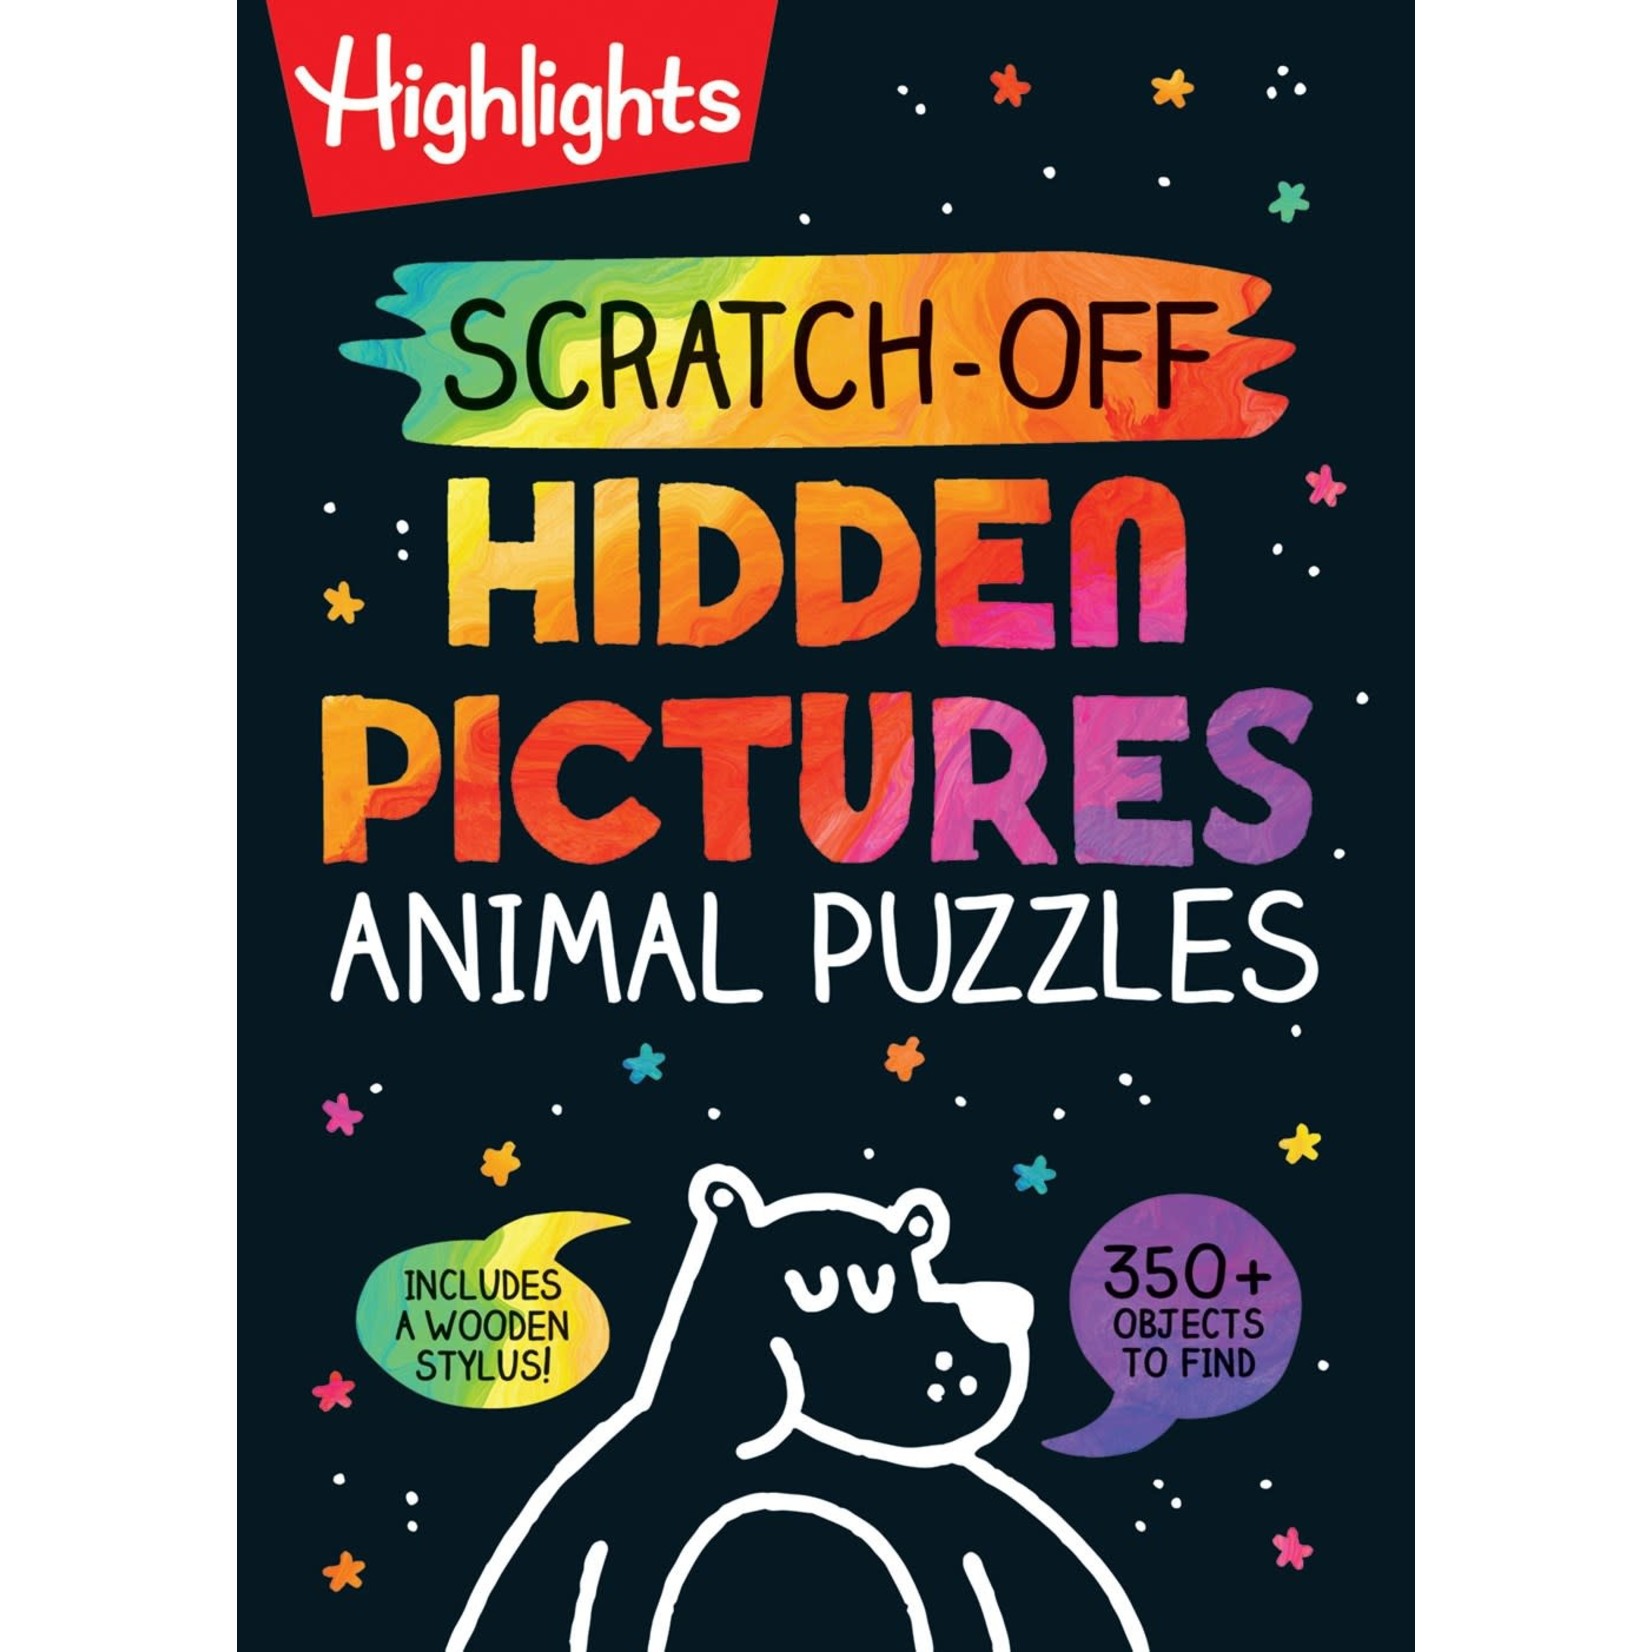 Scratch-Off Hidden Pictures Animal Puzzles